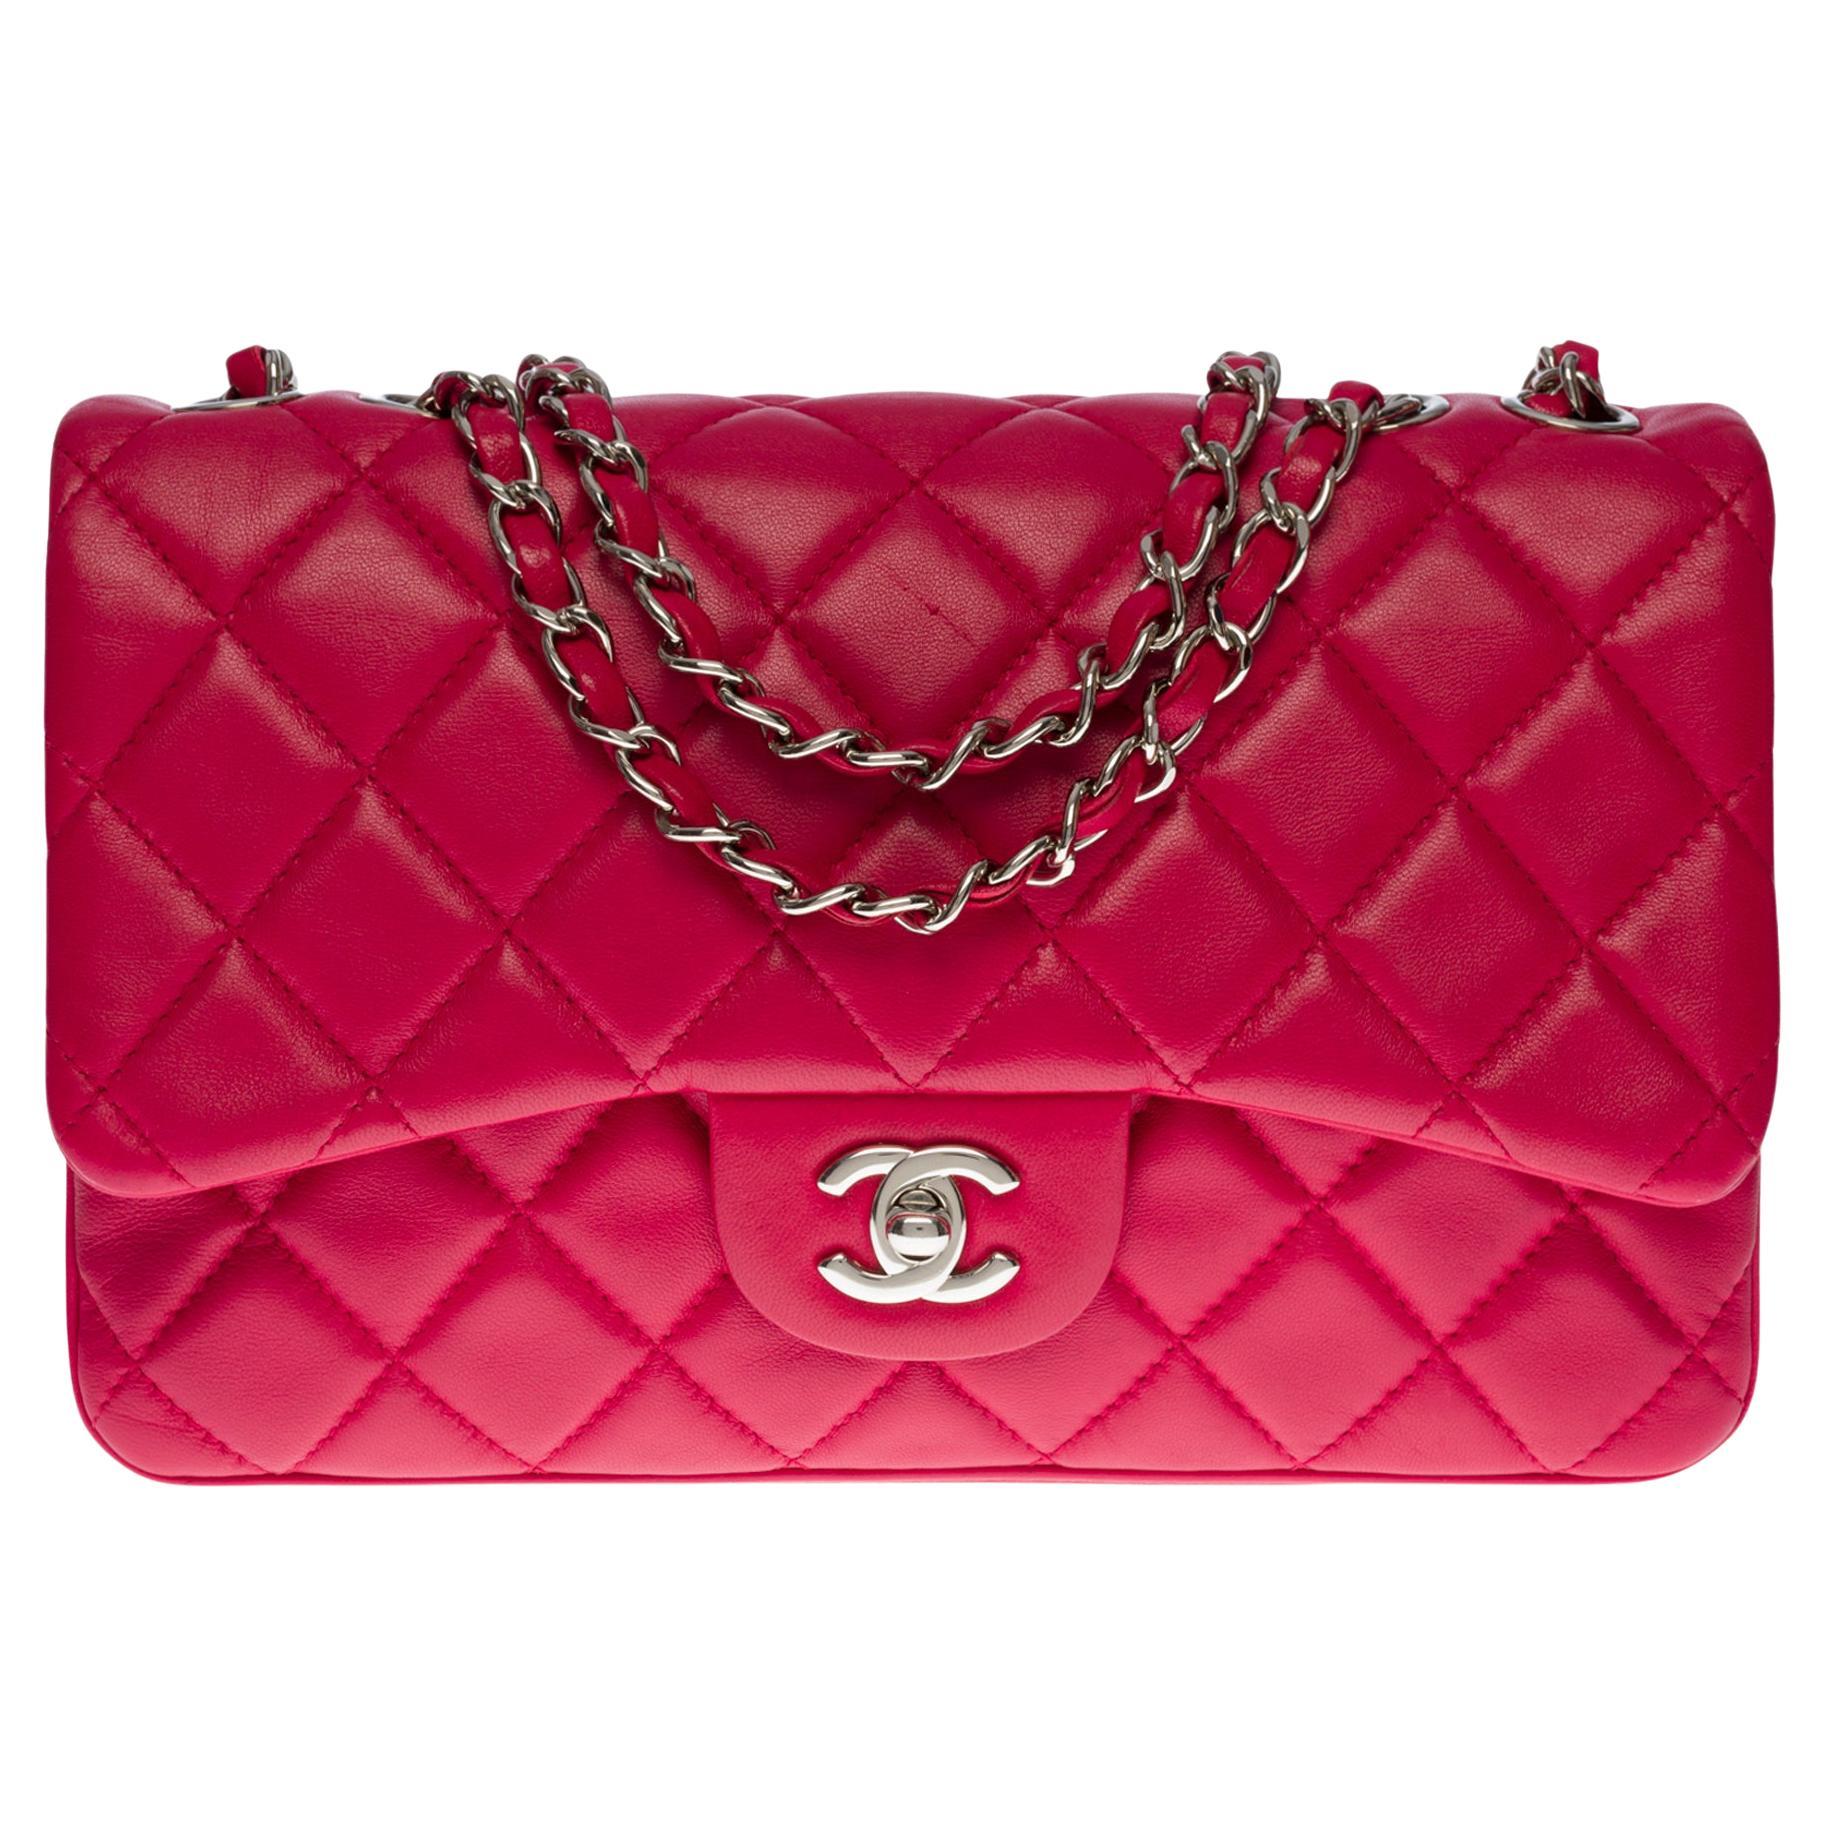 Amazing Chanel Classic shoulder Flap bag in red quilted lambskin